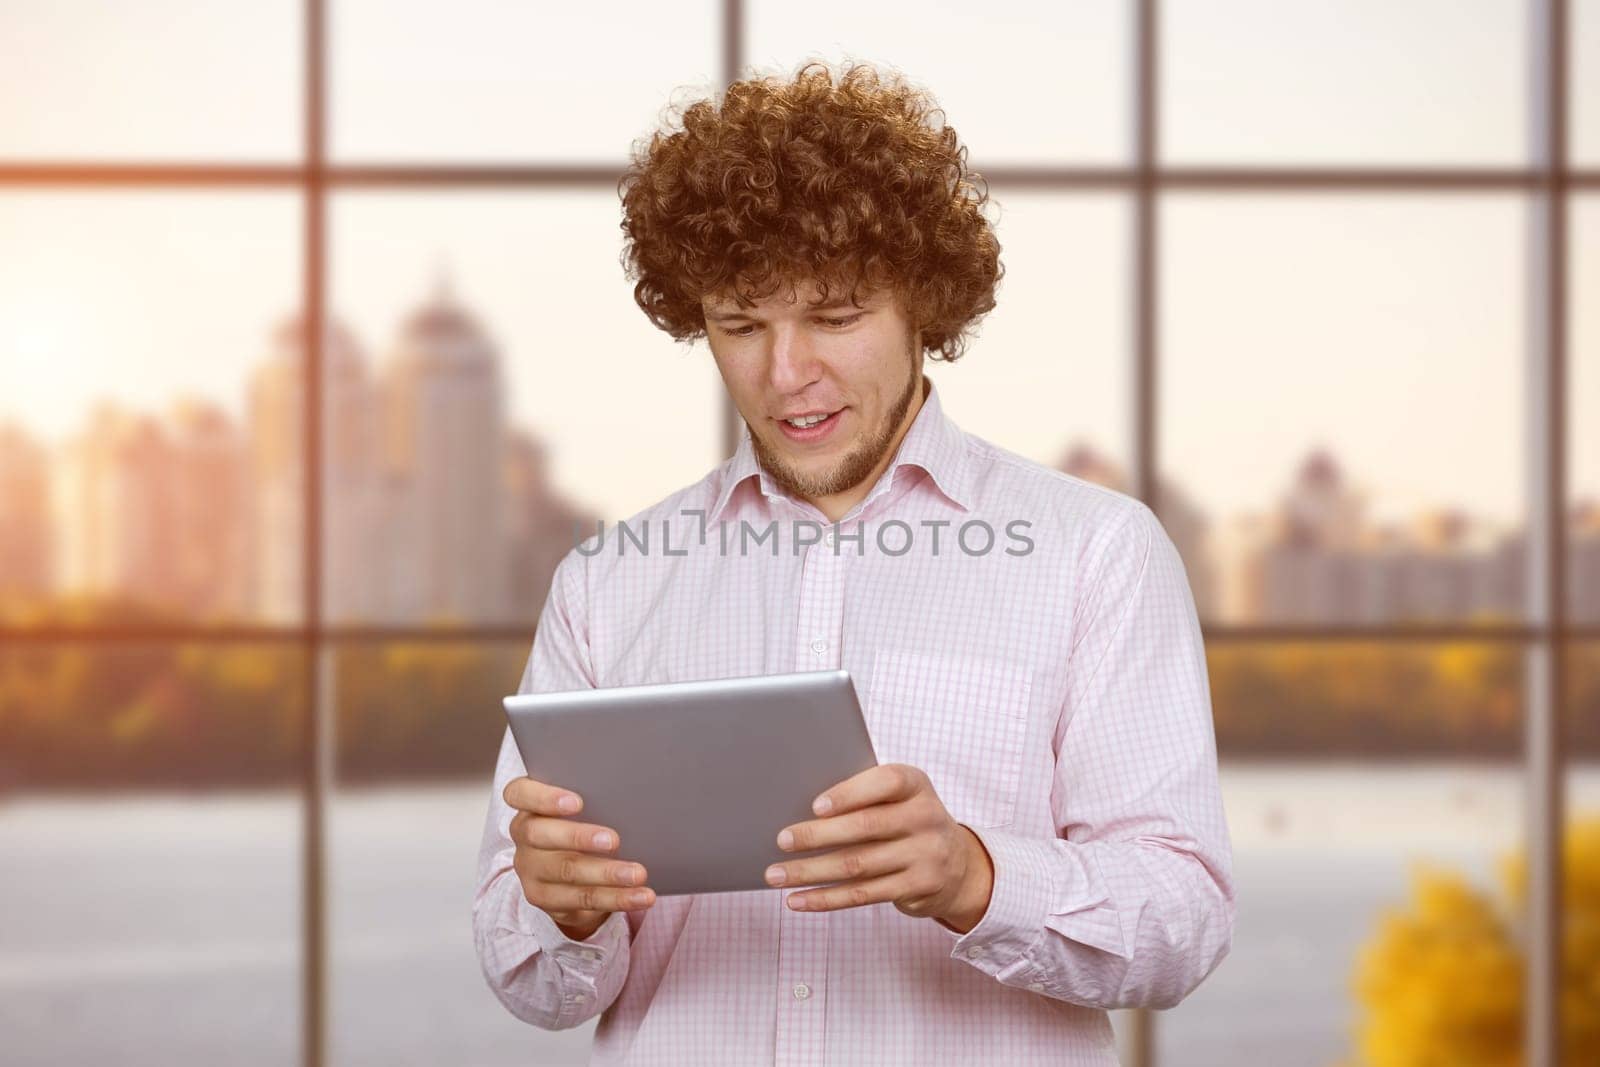 Portrait of a young caucasian man with curly hair playing a video game on the tablet pc device. Indoor window in the background.